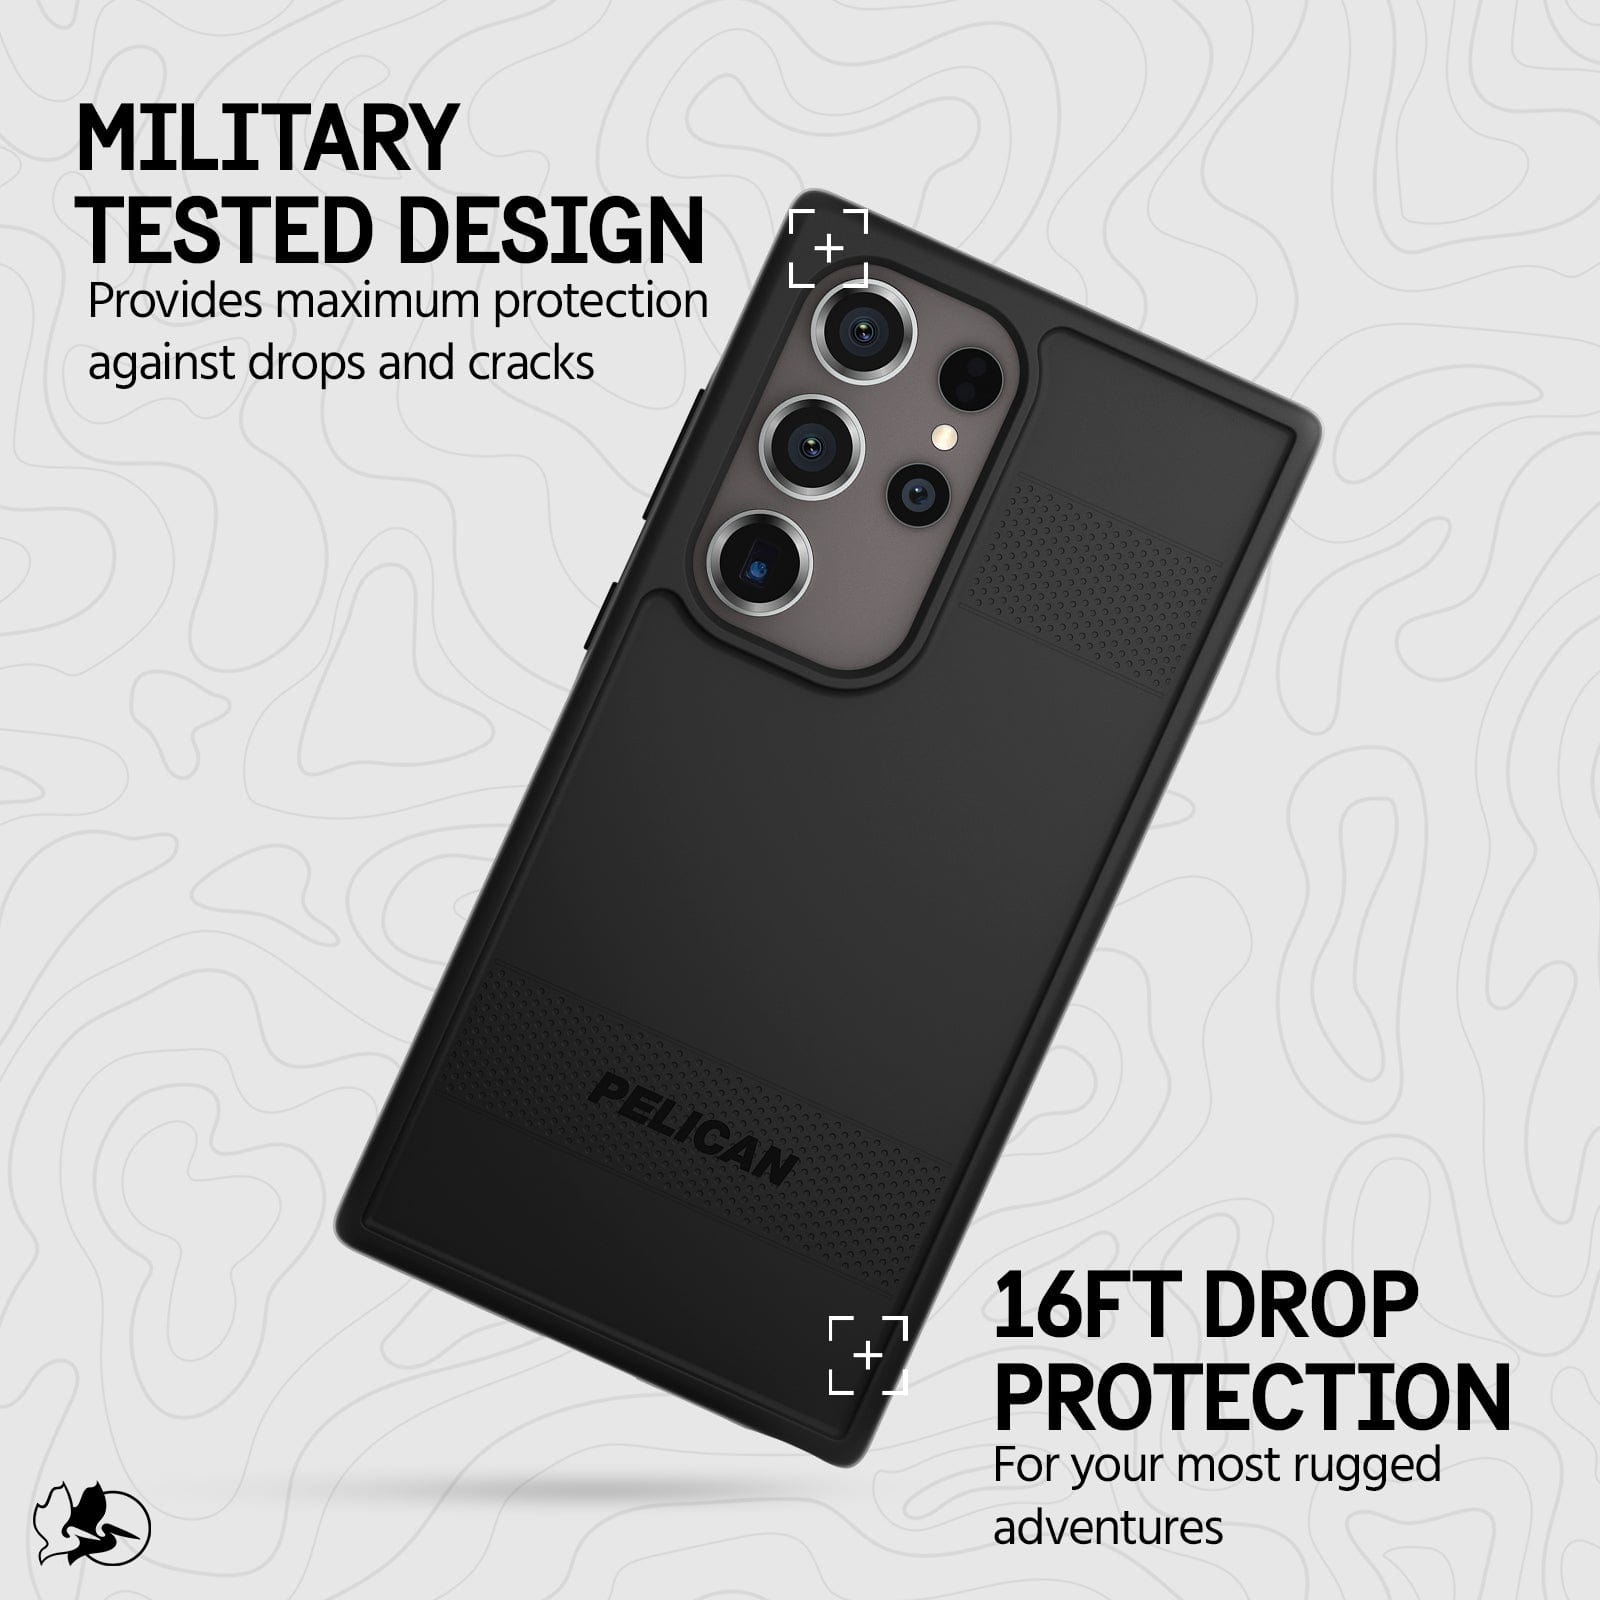 MILITARY TESTED DESIGN PROVIDES MAXIMUM PROTECTION AGAINST DROPS AND CRACKS. 16FT DROP PROTECTION FOR YOUR MOST RUGGED ADVENTURES.